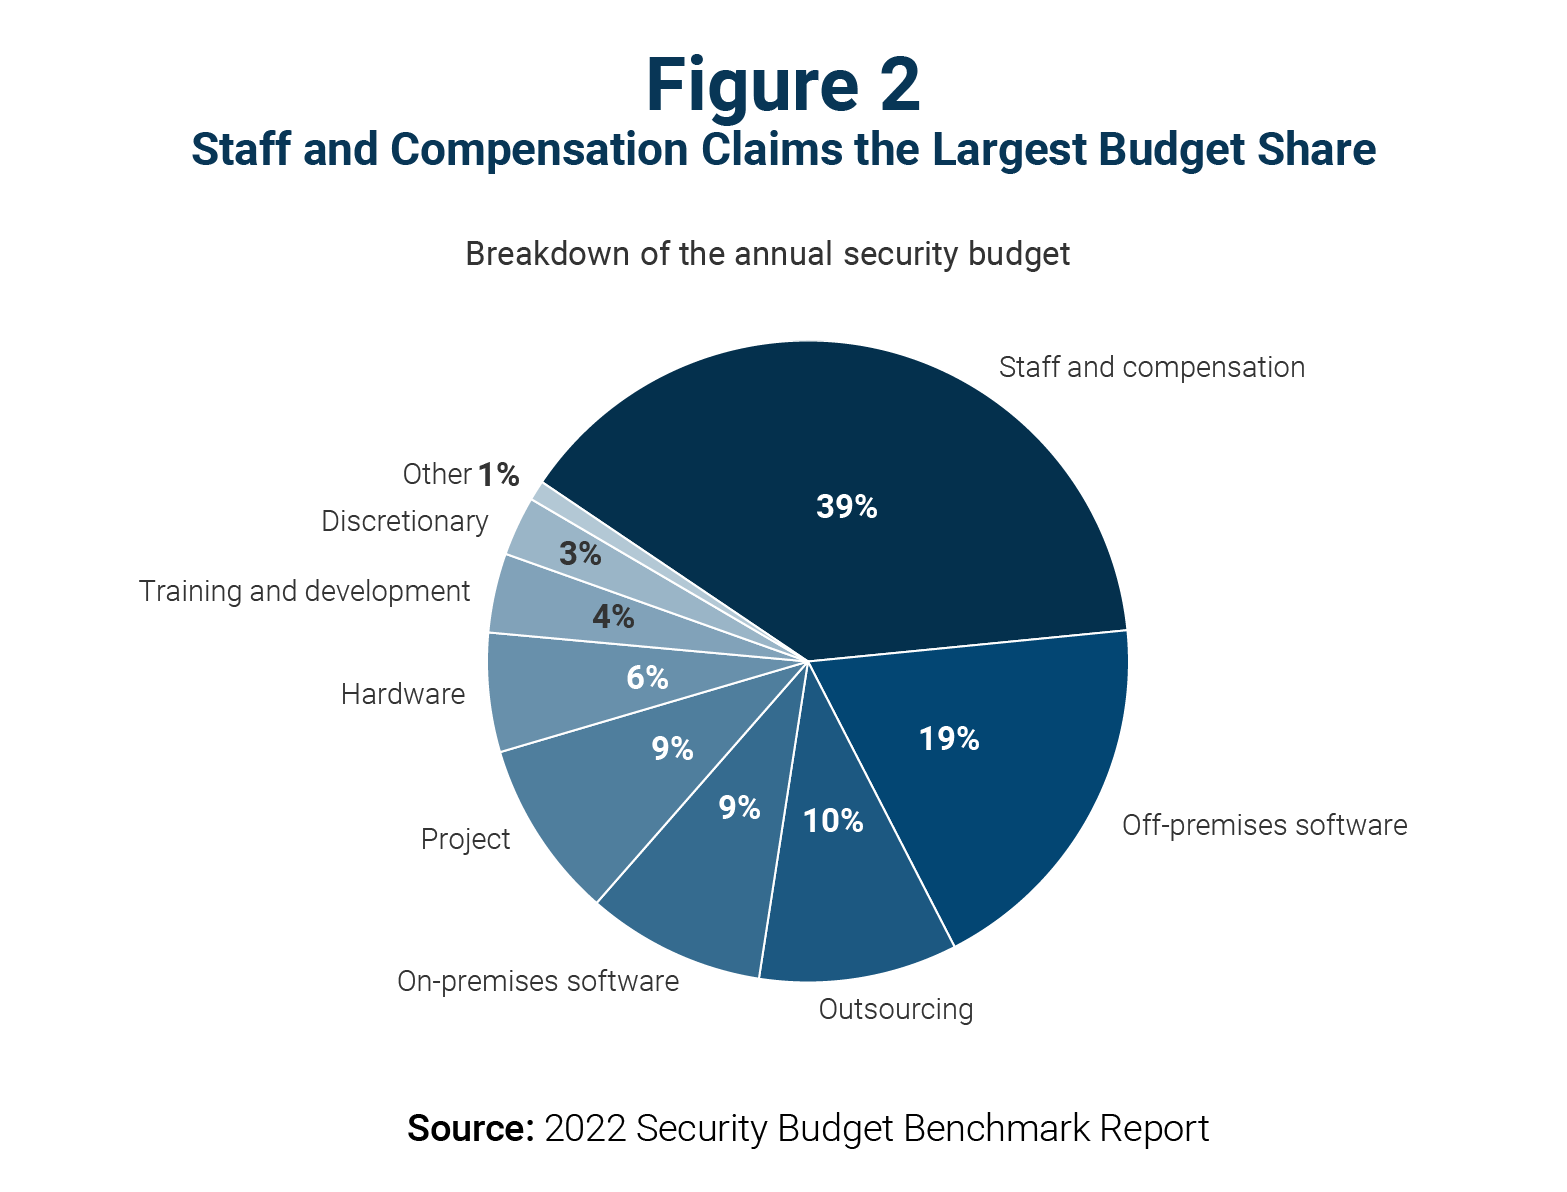 Figure displaying Staff and Compensation Claims the Largest Budget Share